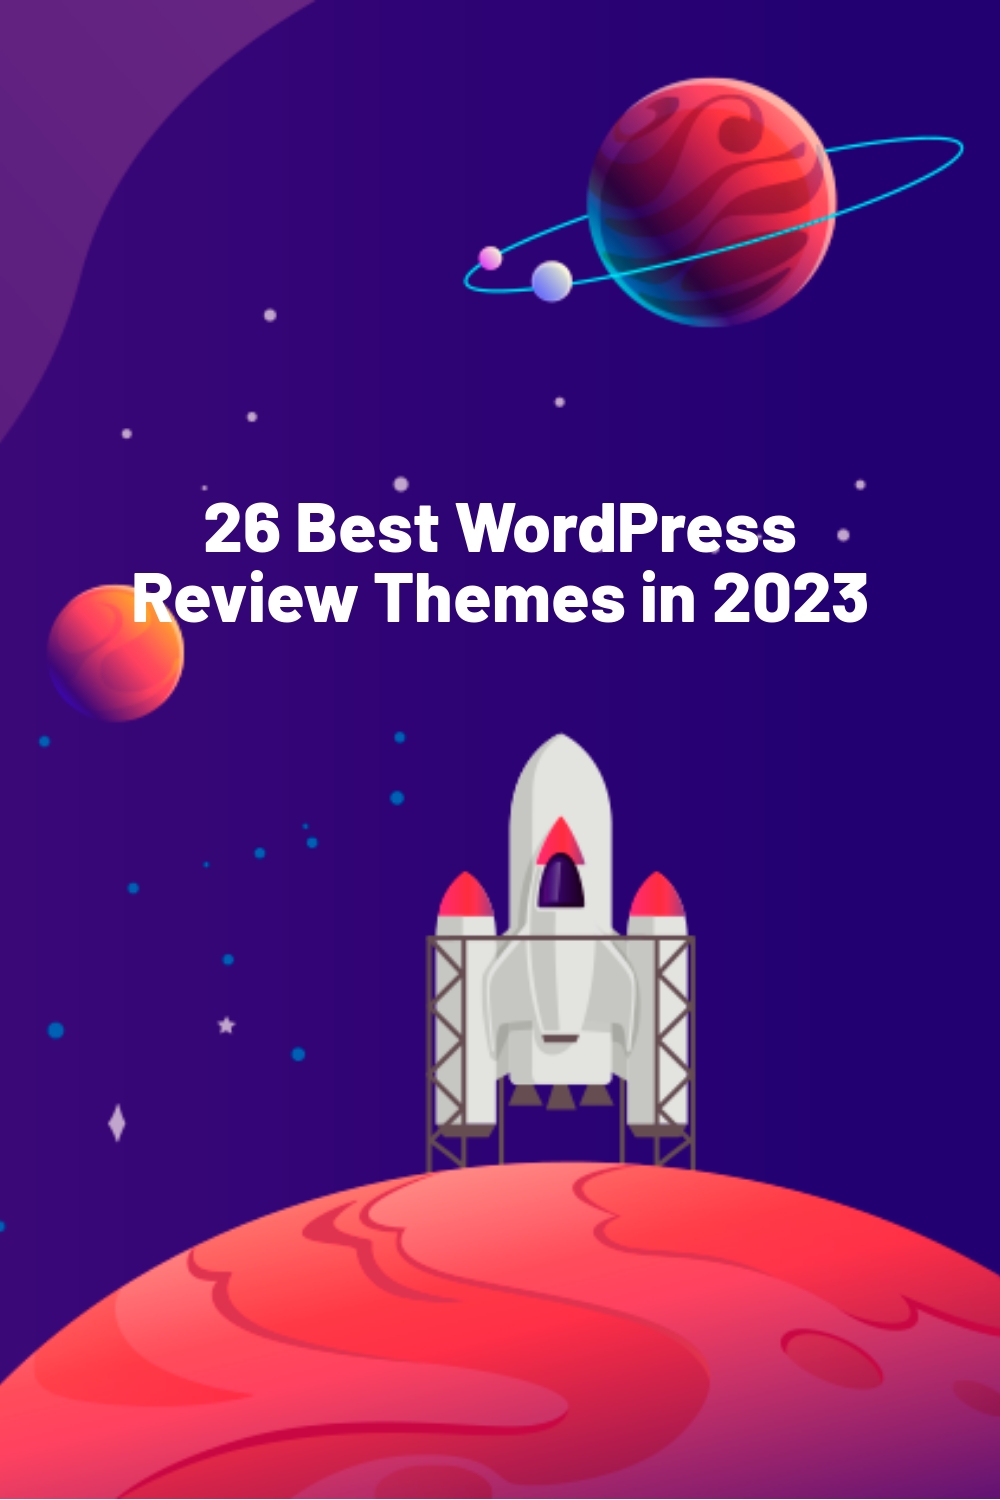 26 Best WordPress Review Themes in 2023